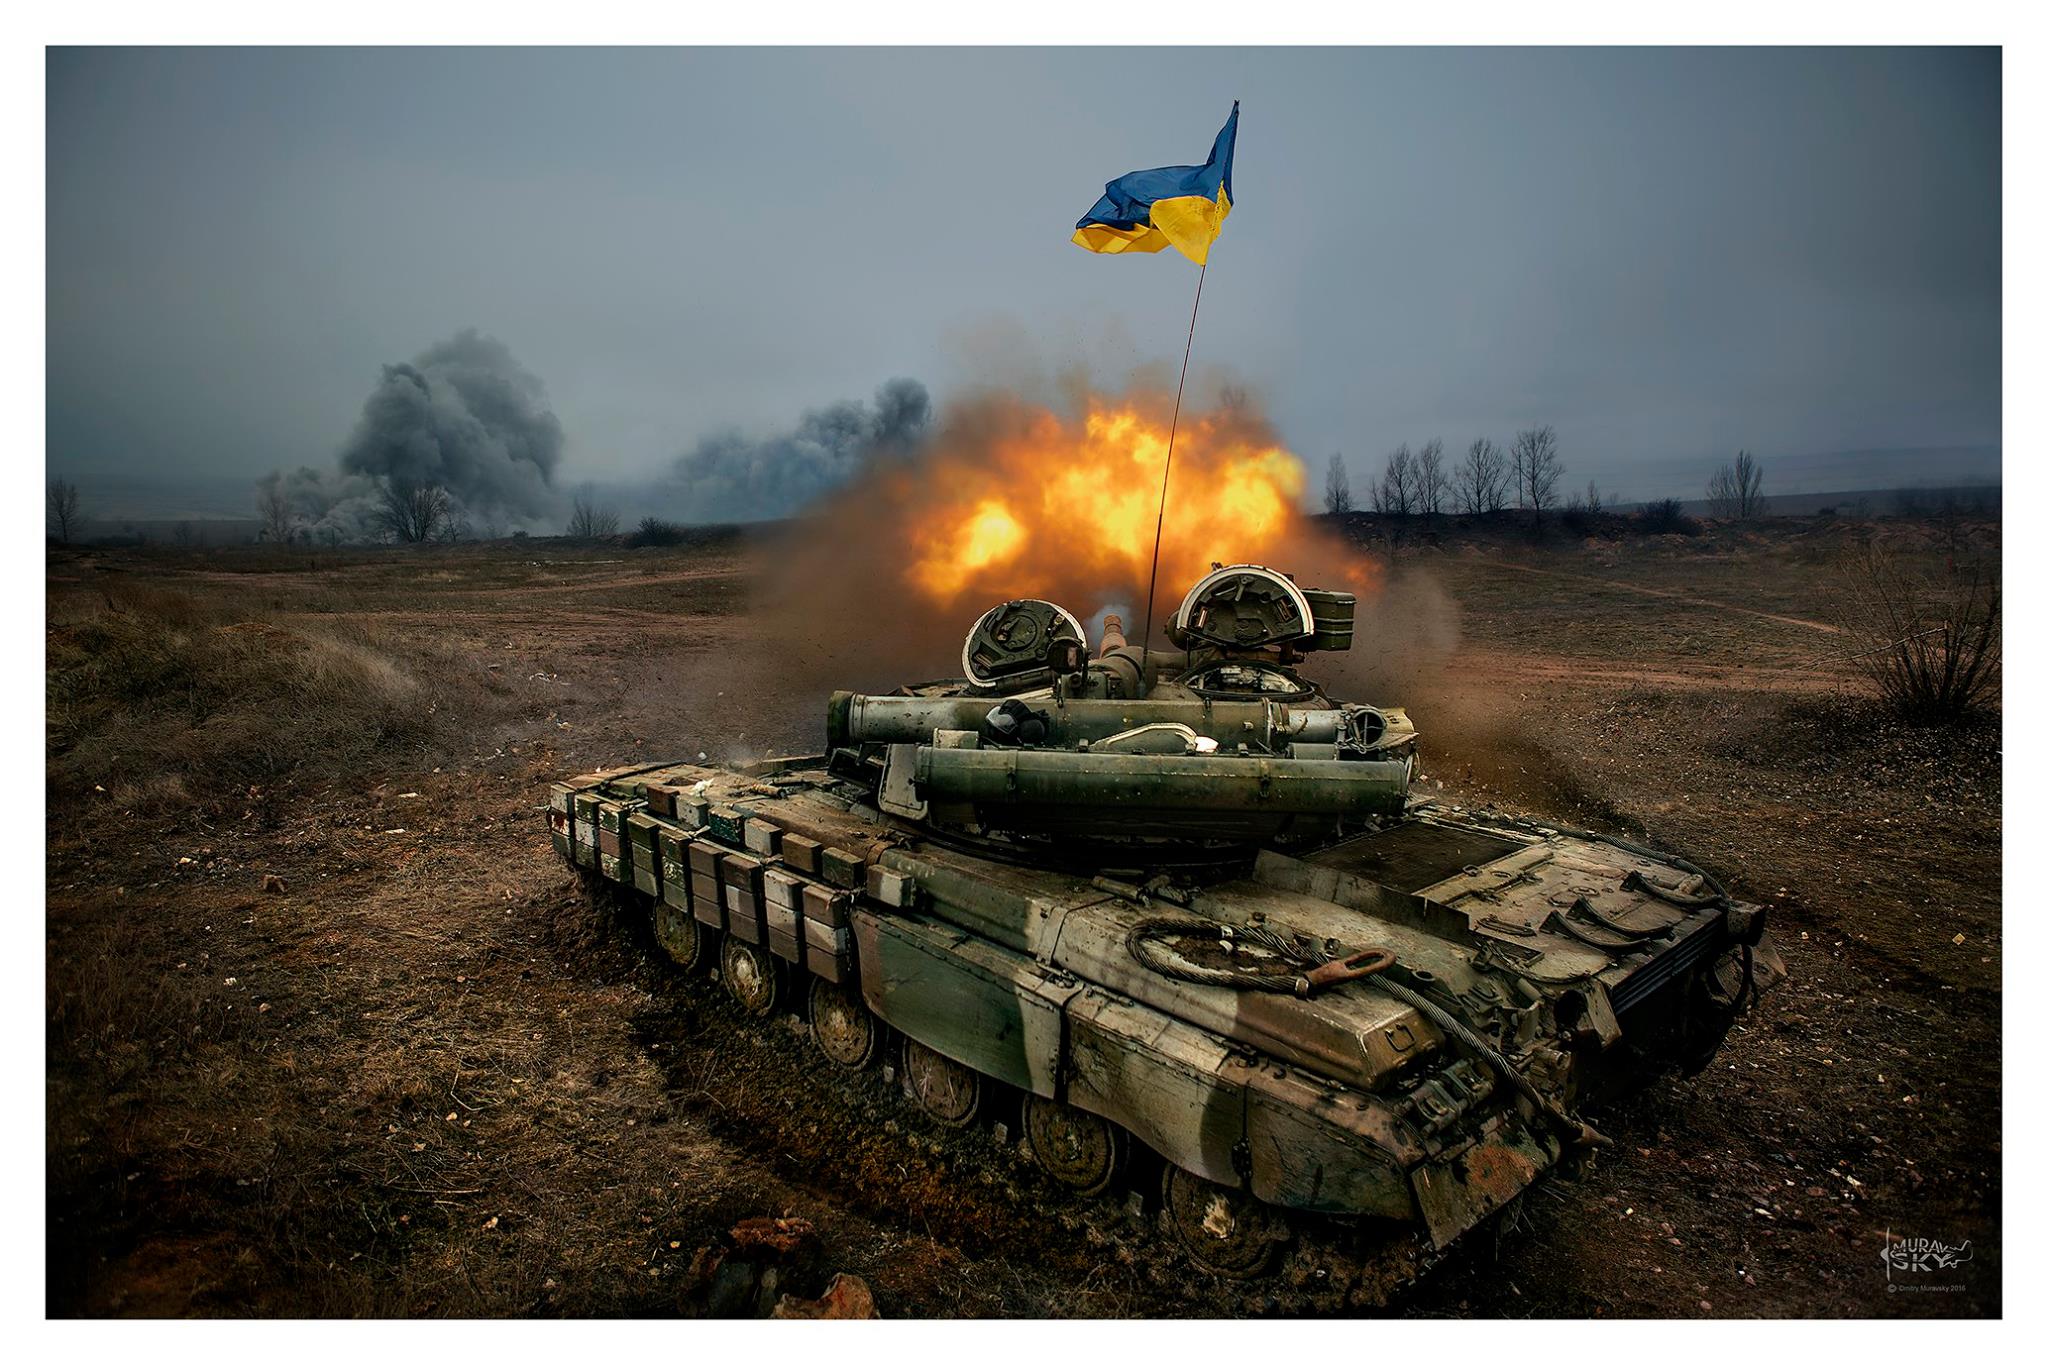 Three comments on Ukraine and nuclear risks